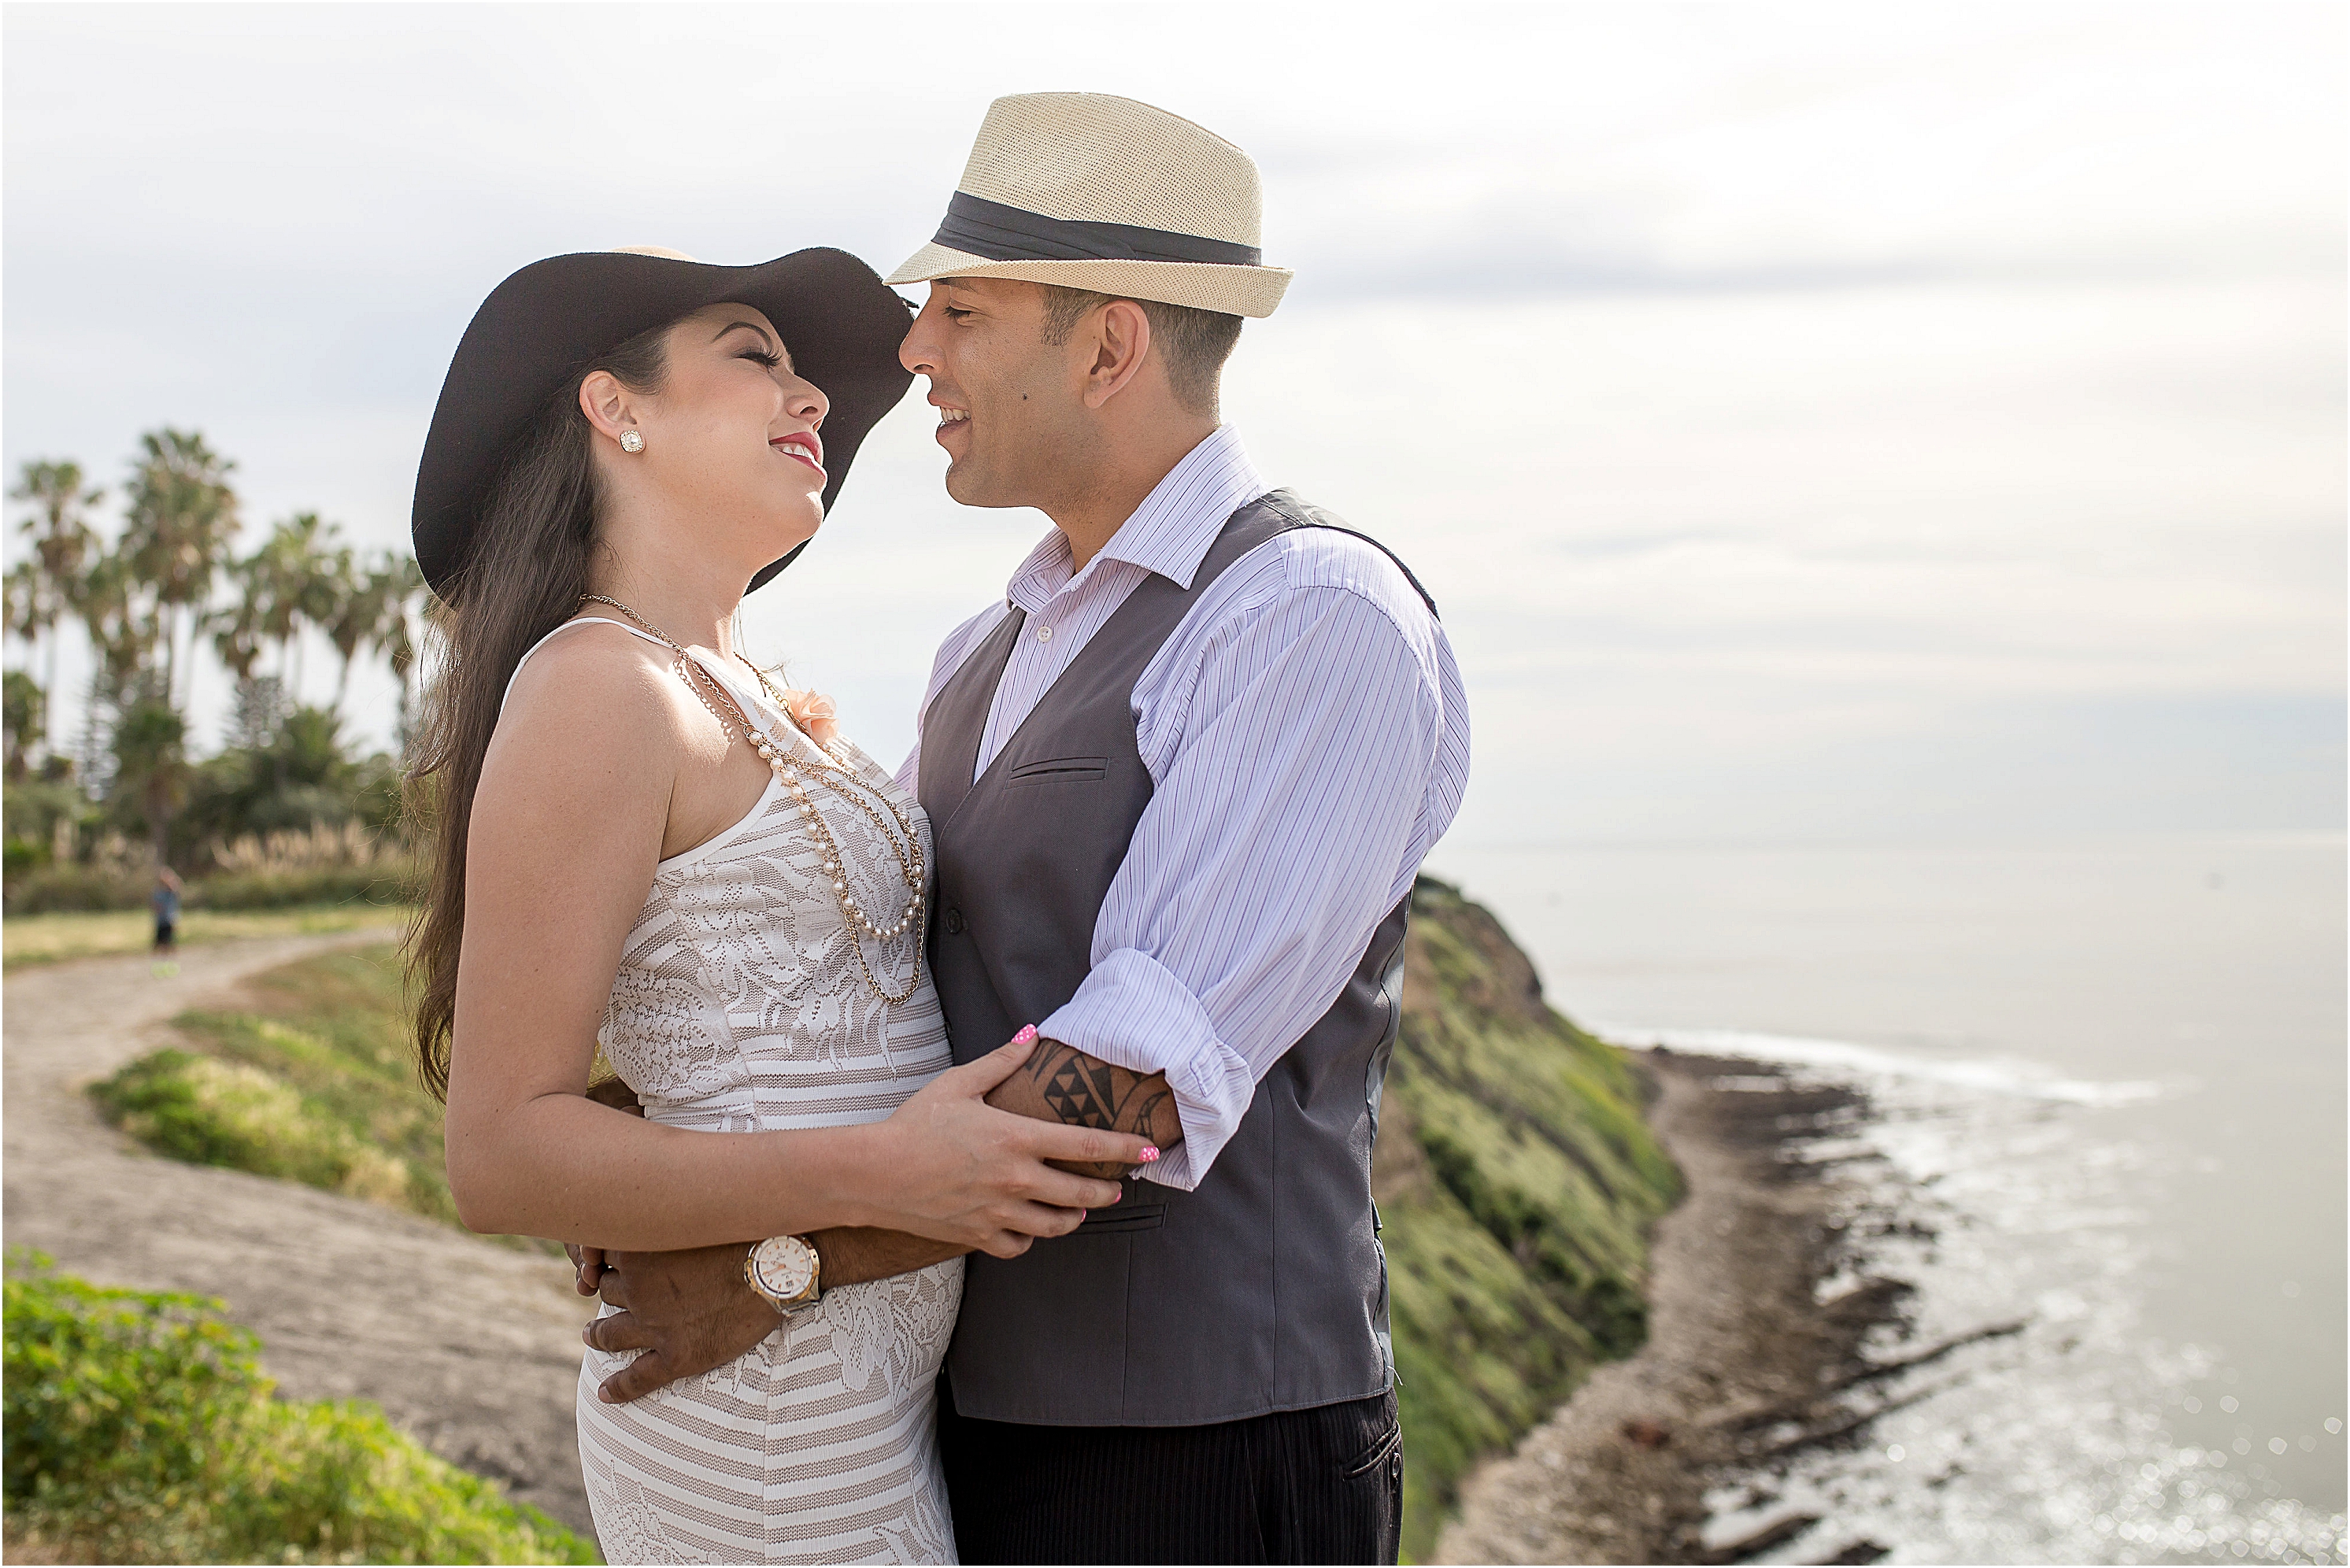 Natural posing for engagement photography in palos verdes, ca